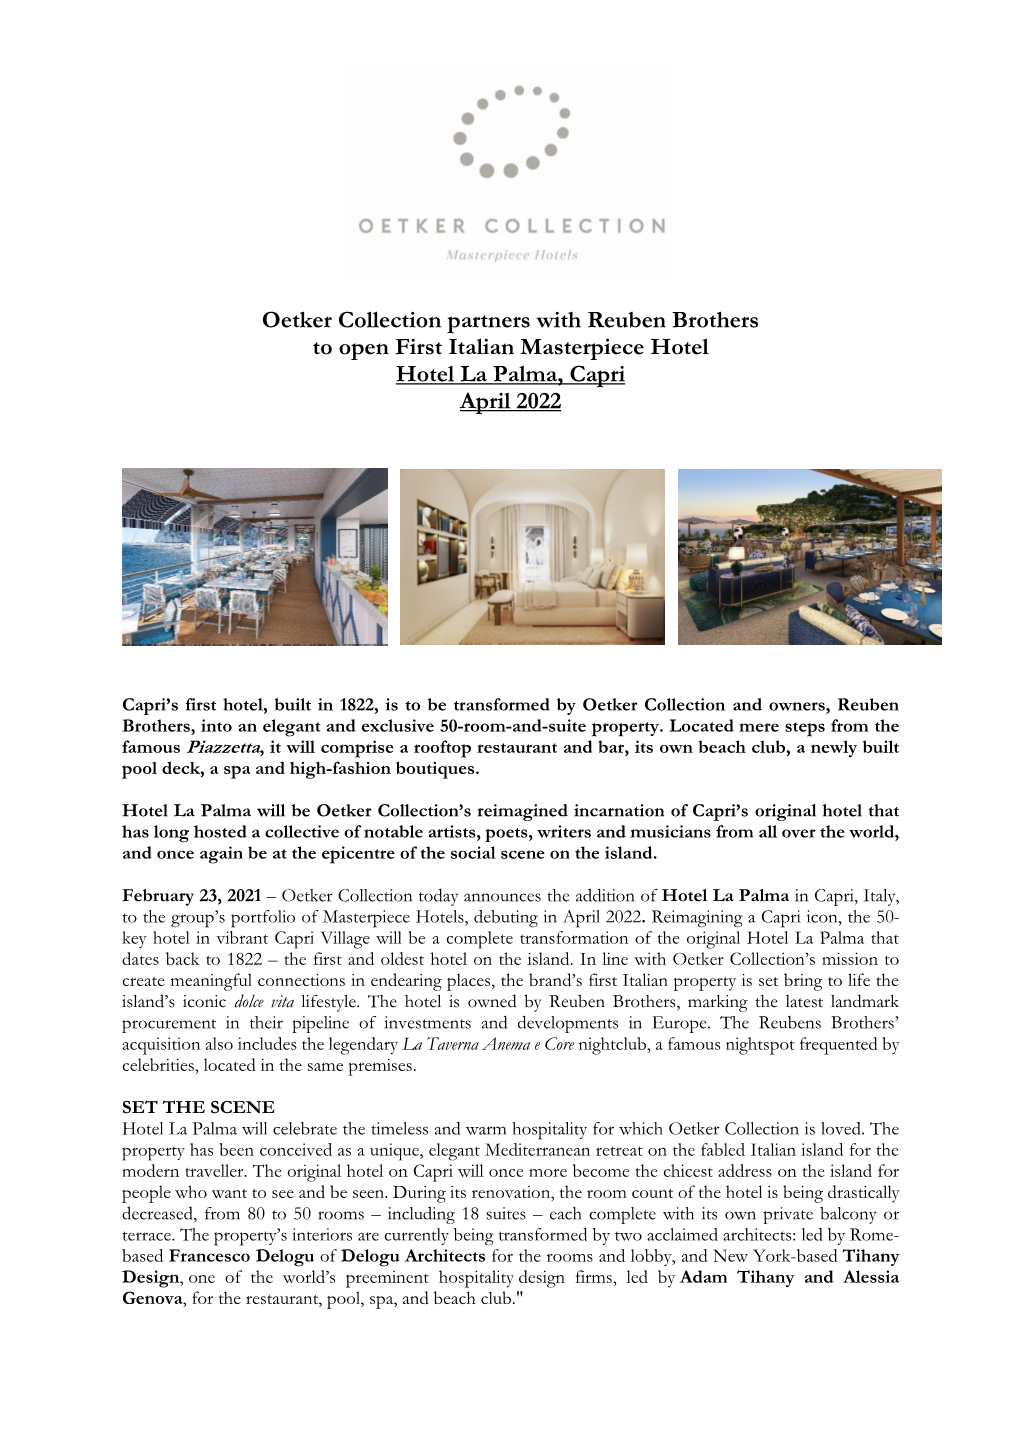 Oetker Collection Partners with Reuben Brothers to Open First Italian Masterpiece Hotel Hotel La Palma, Capri April 2022